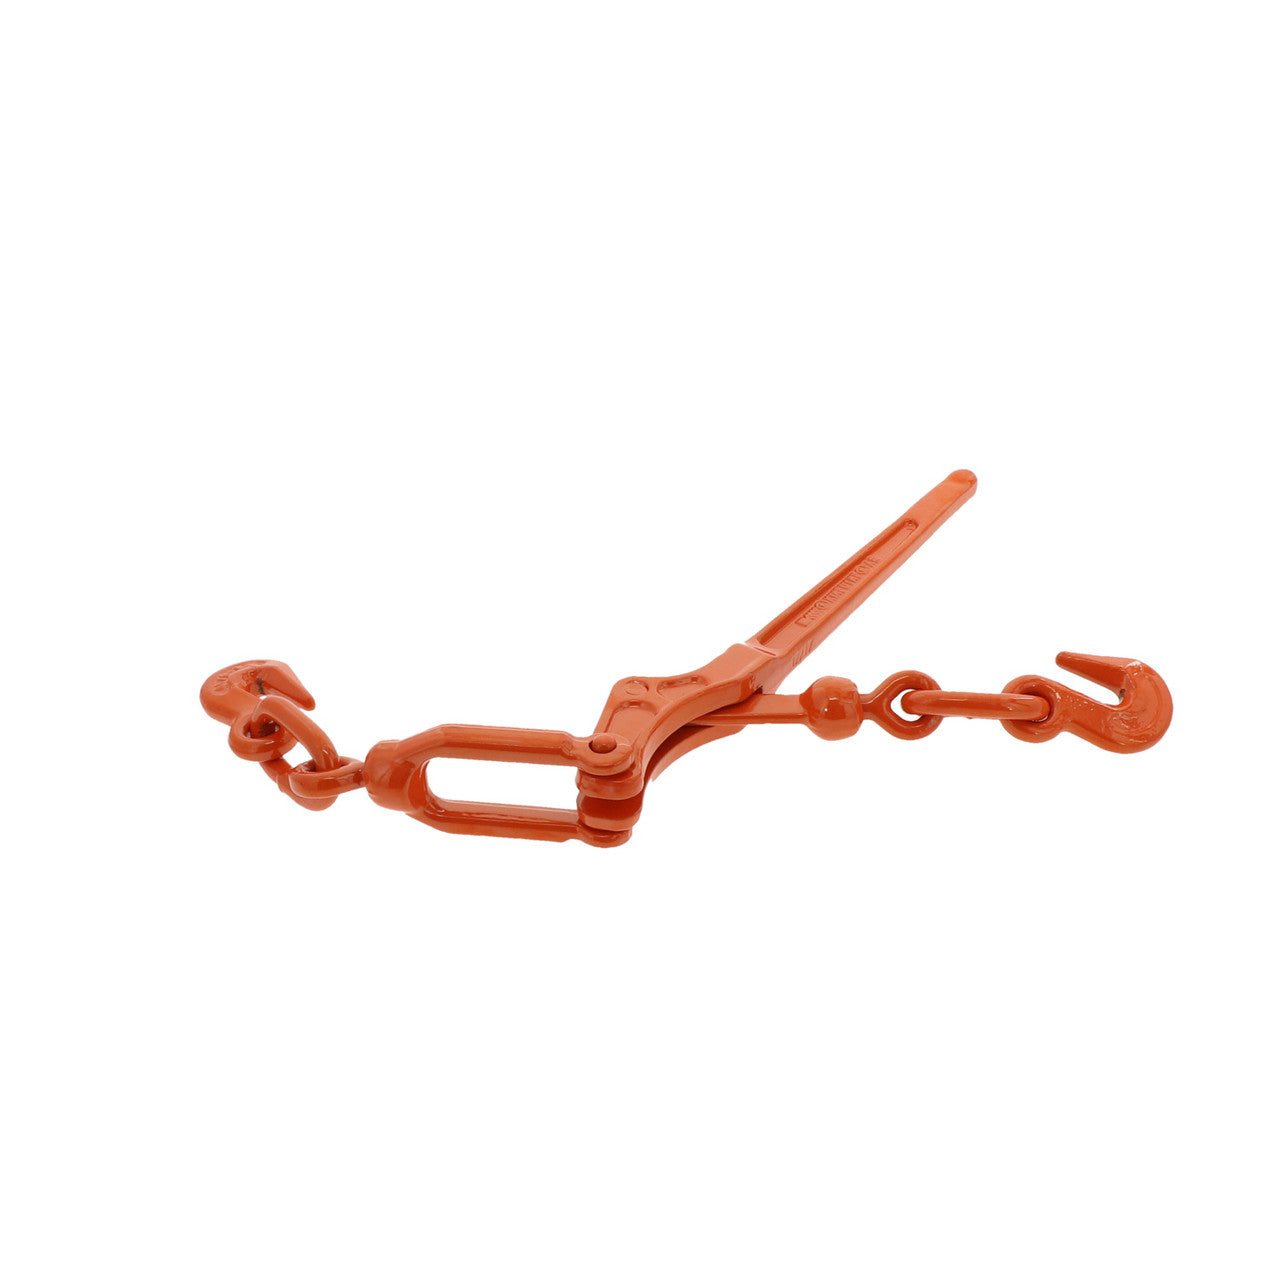 Kinedyne Lever Style Chain Binder for 1/4" - 5/16" Chains